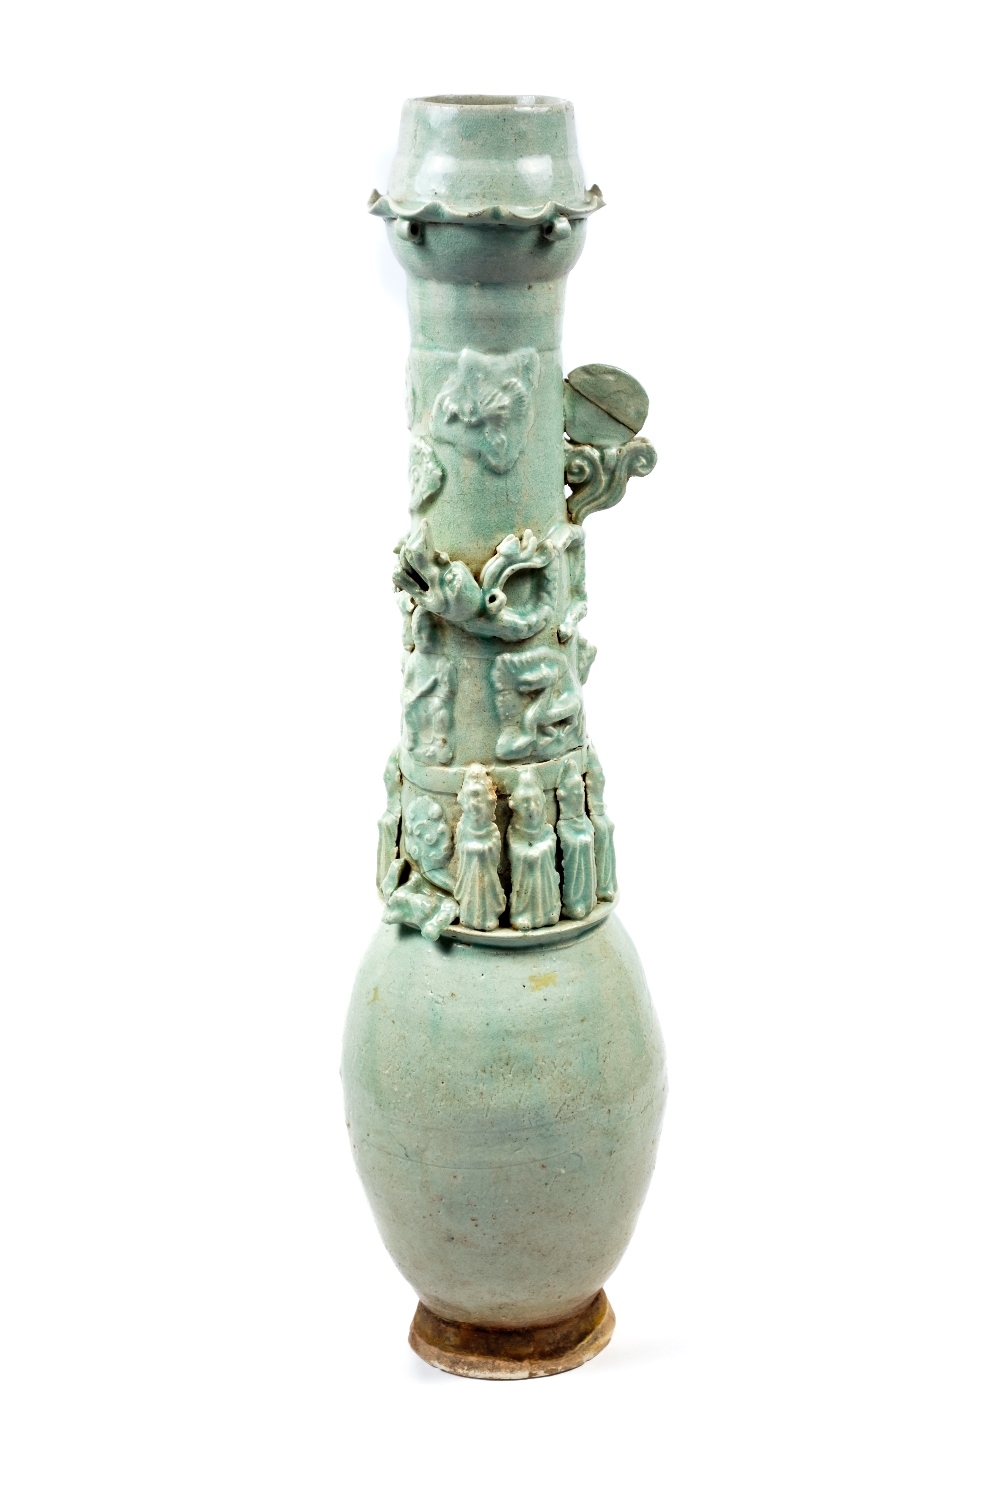 A Chinese celadon tall funerary vase Song dynasty with dragons and figures around the body of the